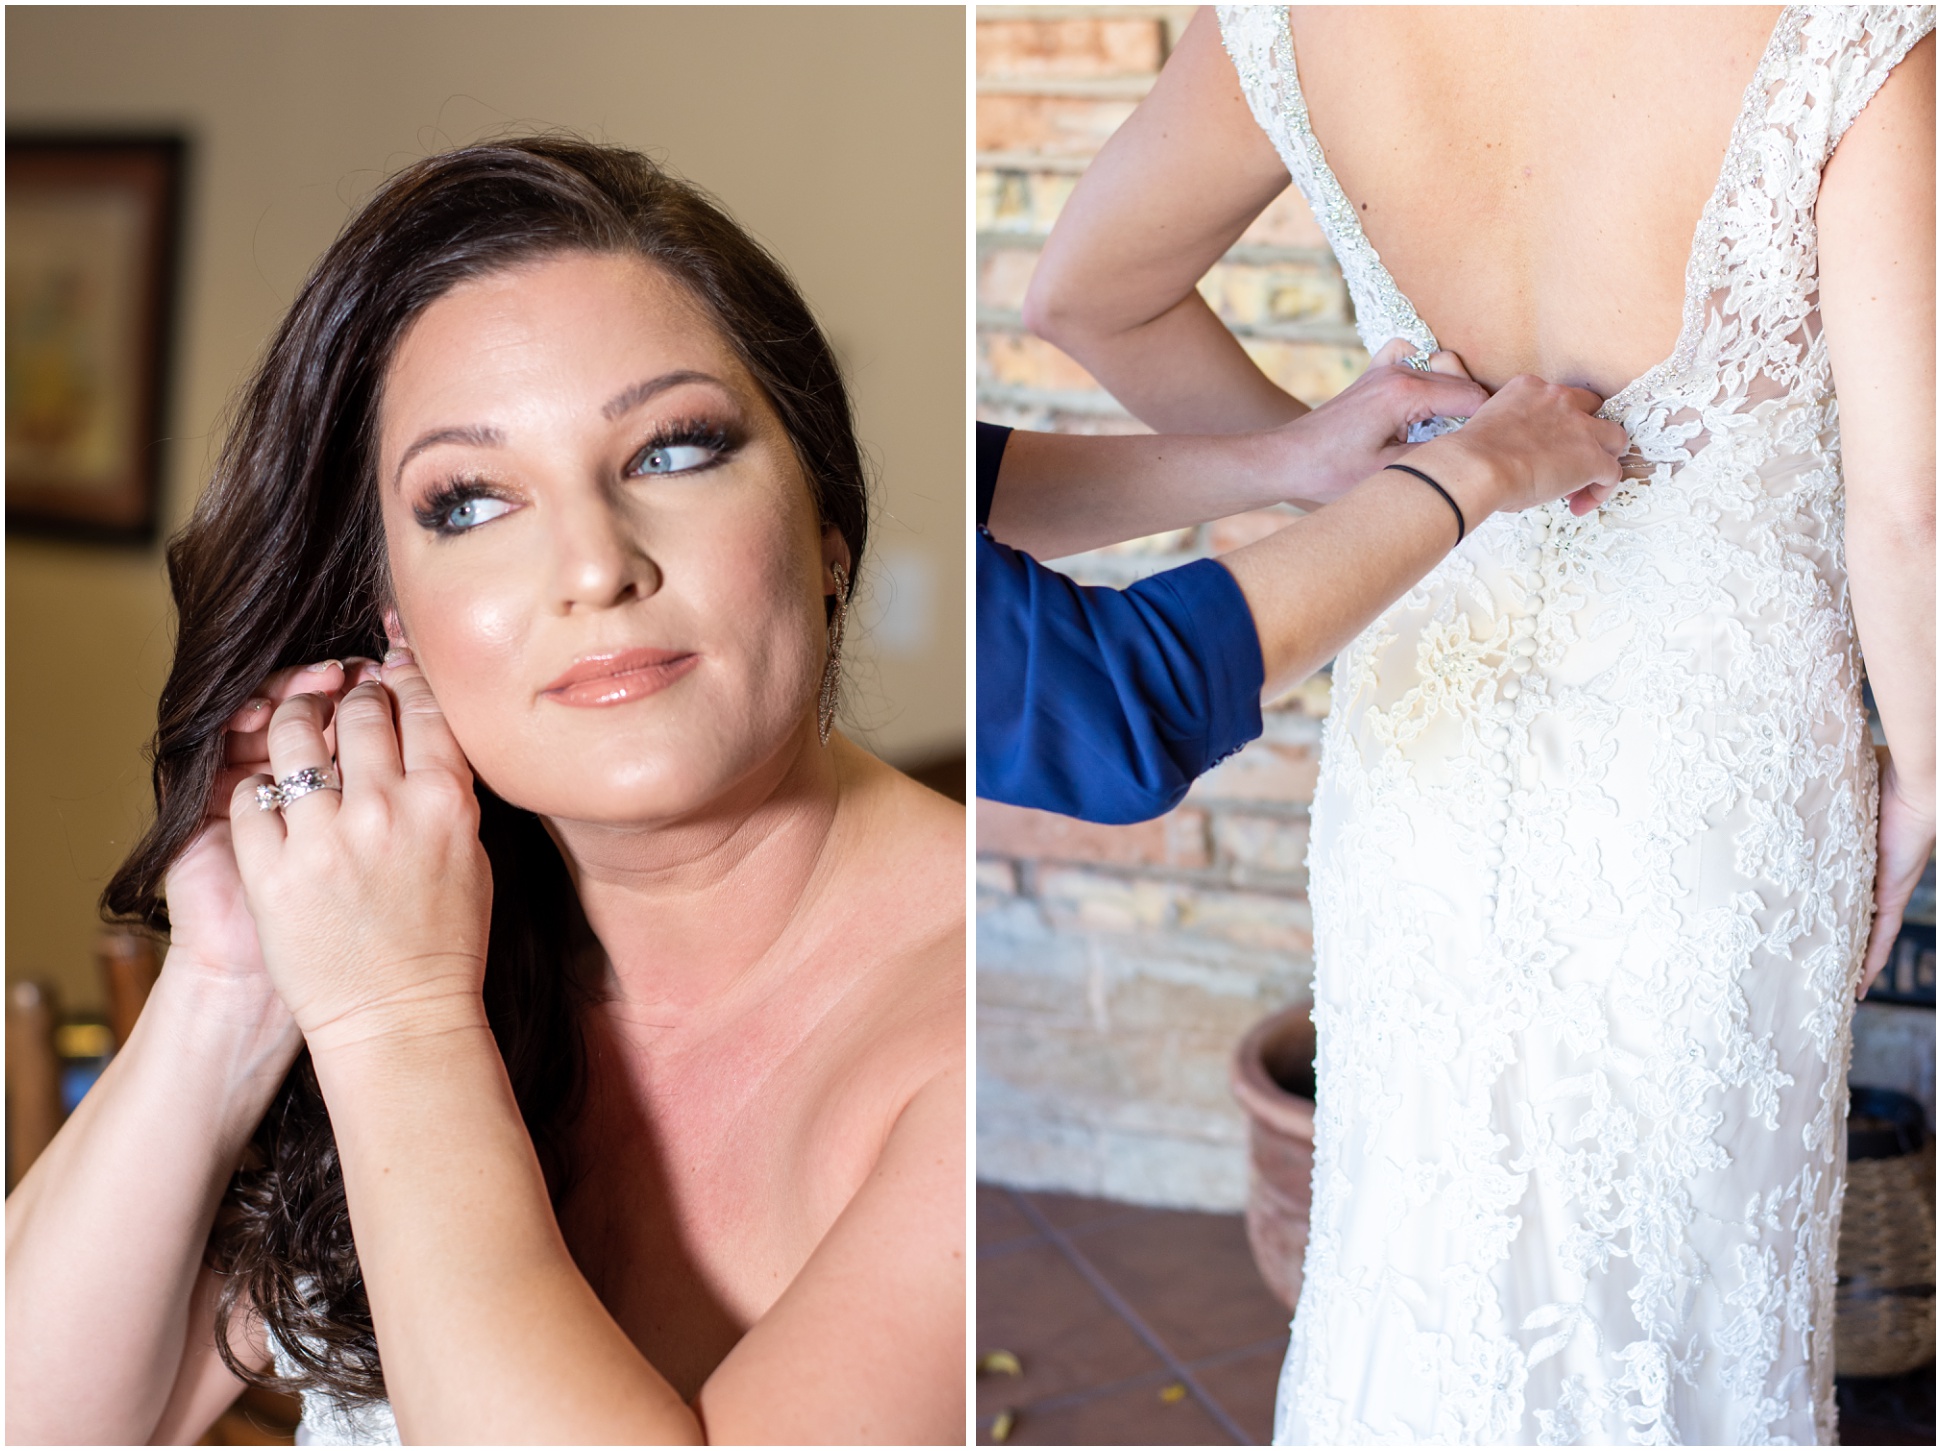 Left Photo: Bride putting on earrings, right photo best friend helping bride into dress